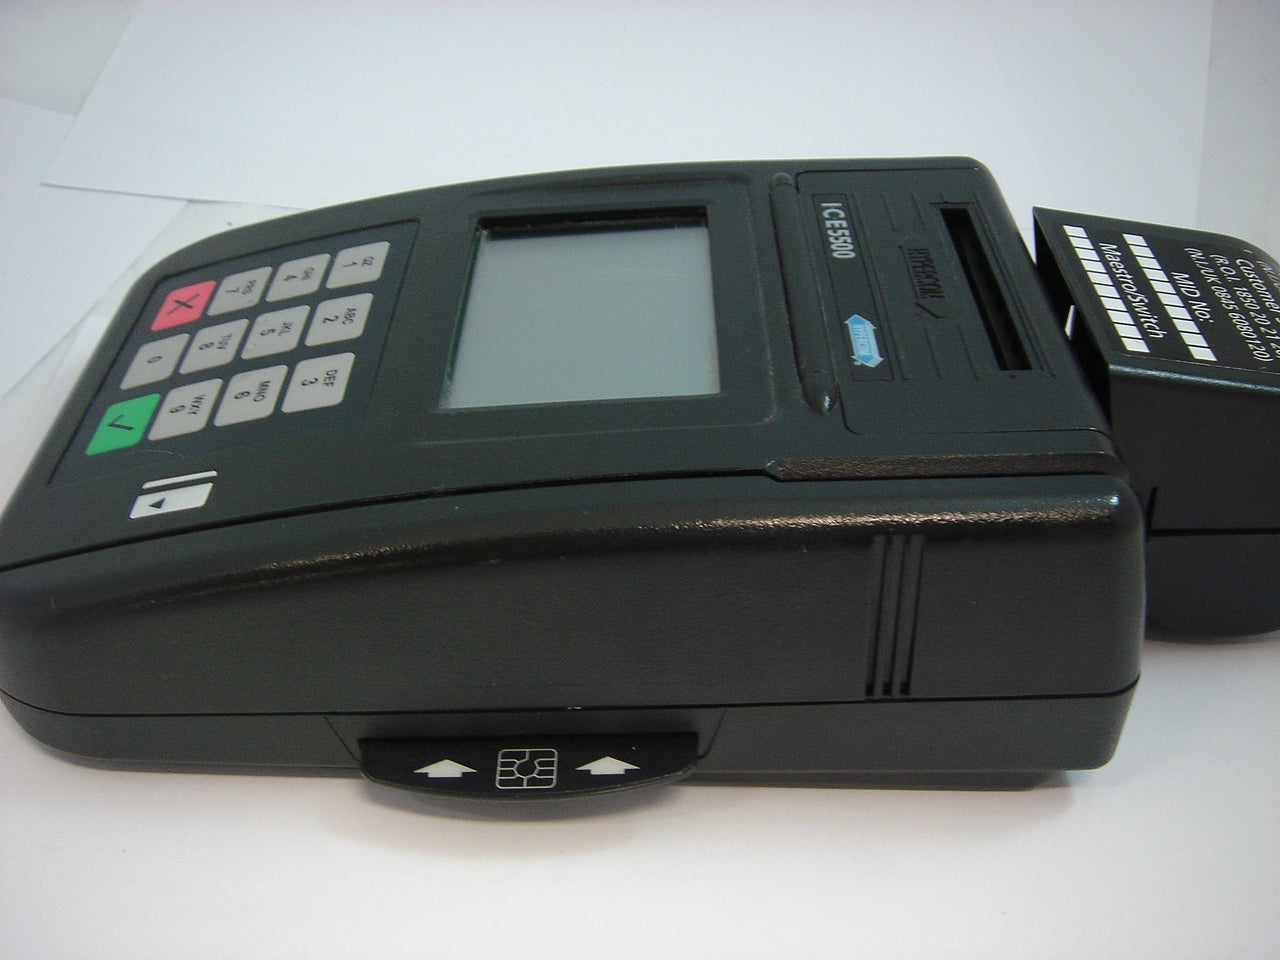 ICE-5500 - Hypercom Credit Card Terminal with Till Roll Holder. No PS - ASIS